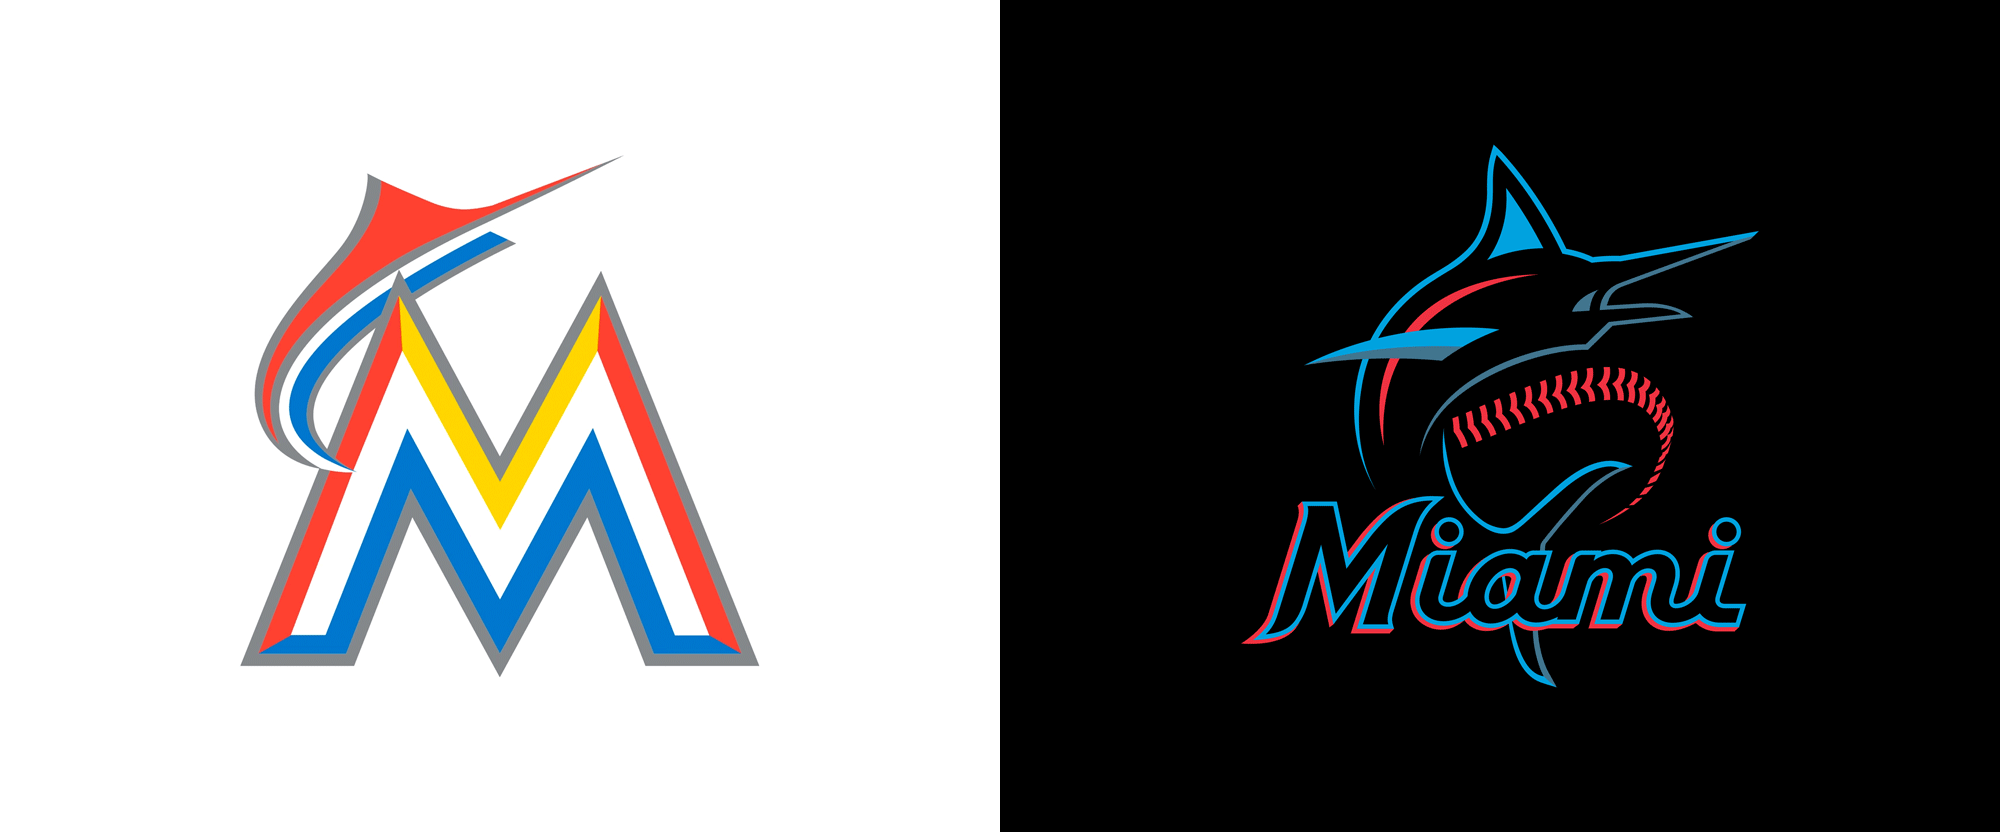 Here's what seems to be the new Marlins logo accidentally posted by MLBShop.com!  : r/mlb